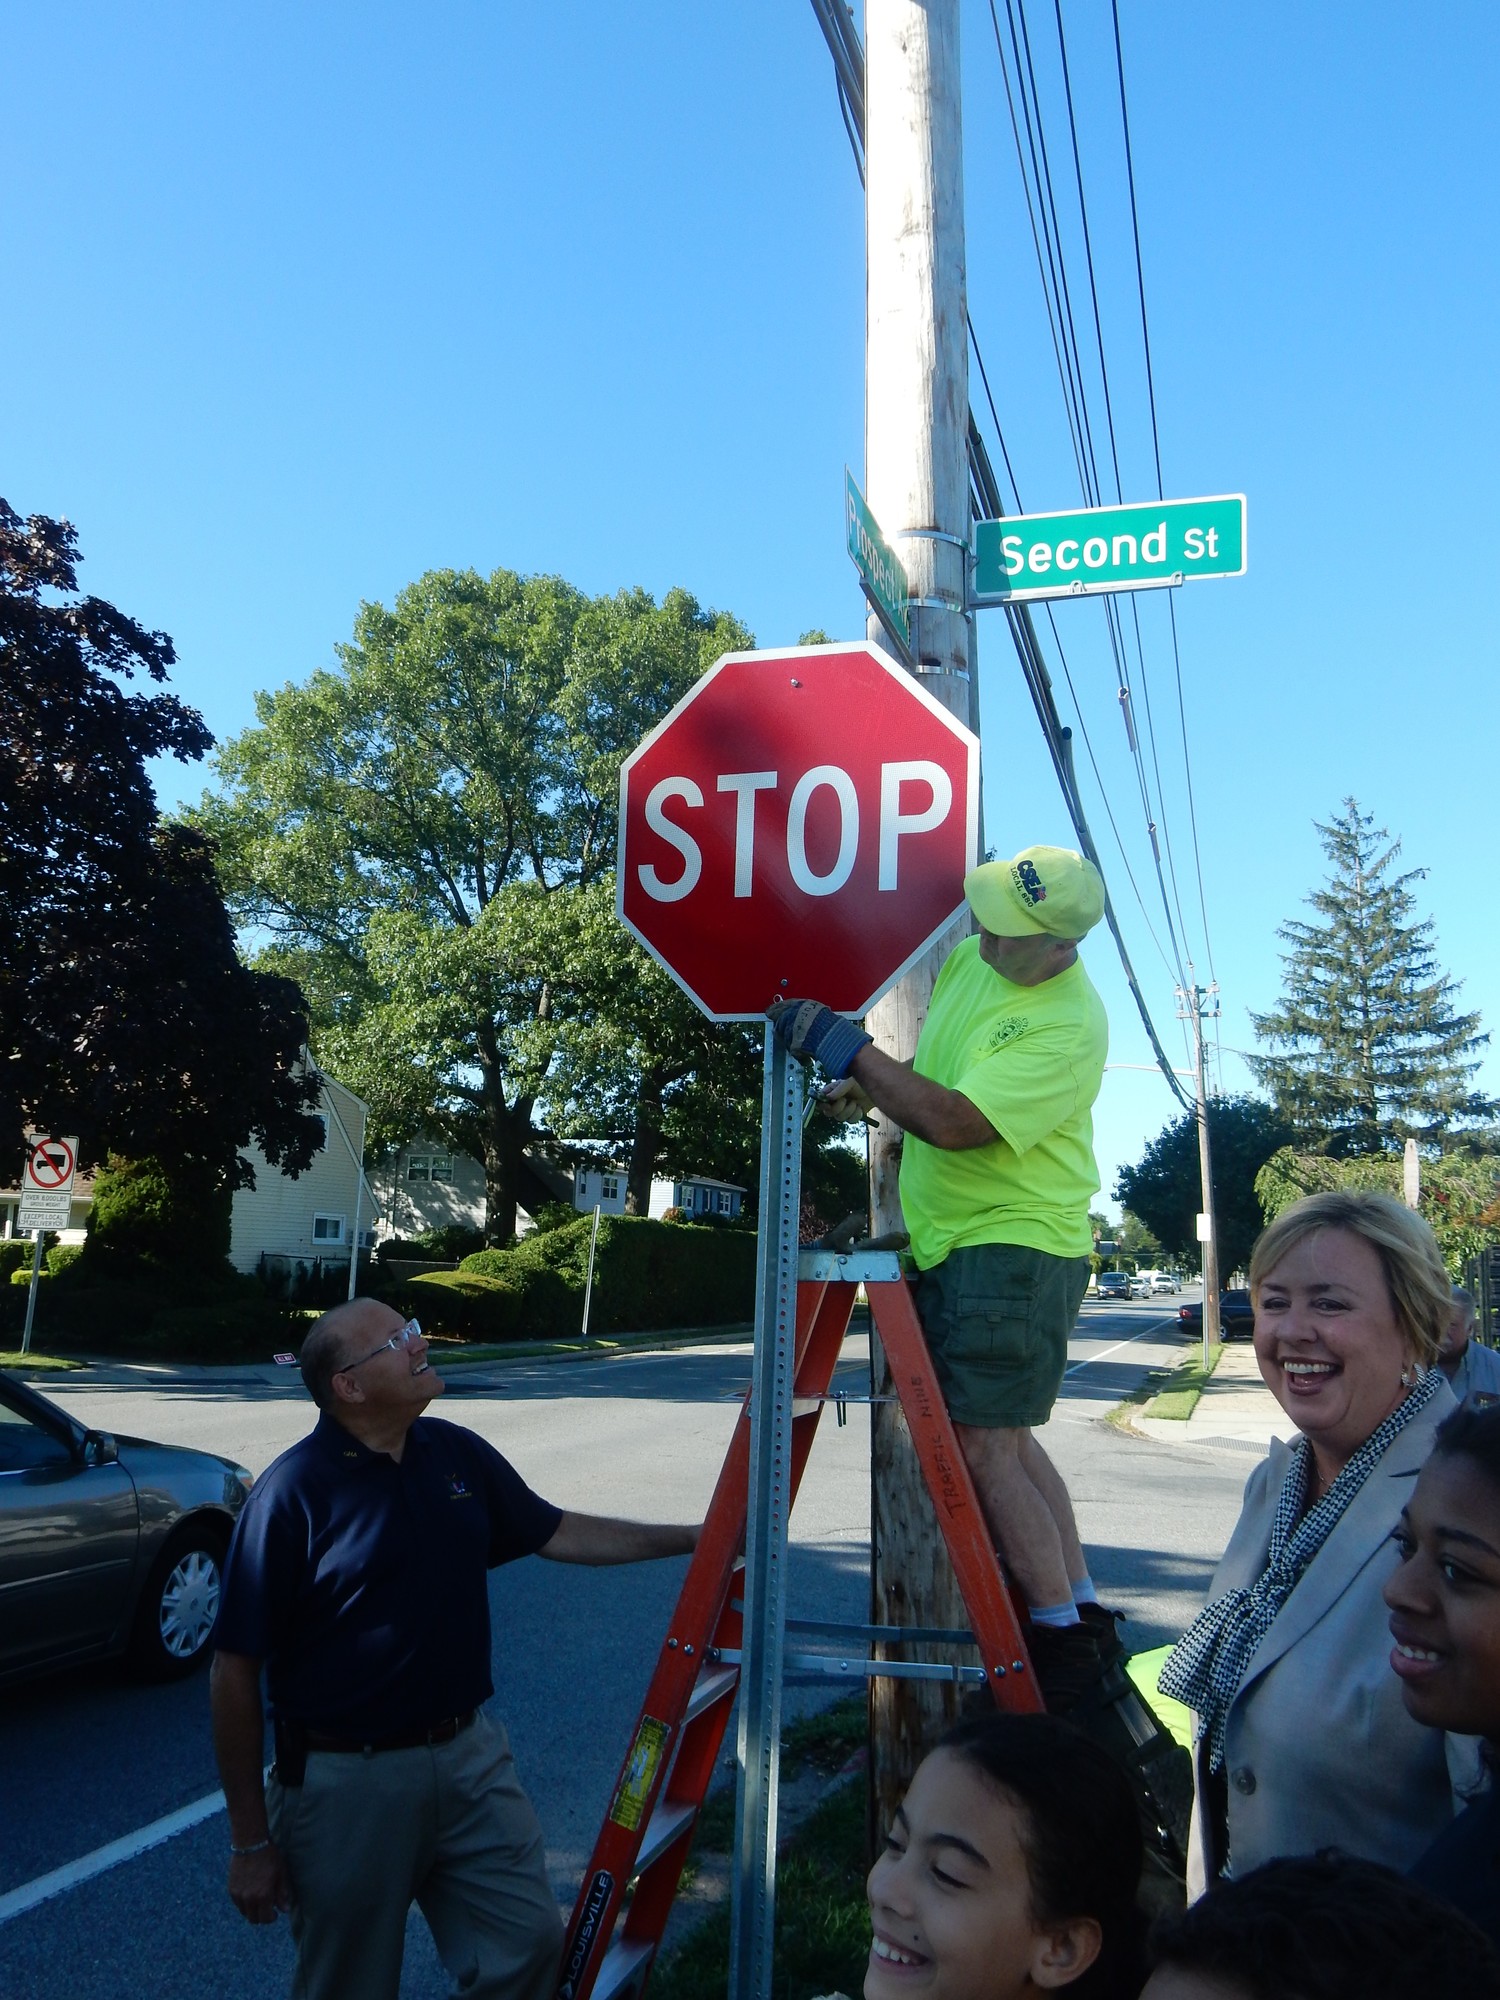 Four-way stop signs were installed by the Town of Hempstead at the intersection of Prospect Avenue and Second Street on Aug. 13. For years, residents have complained that the intersection needed greater safety measures to protect them.